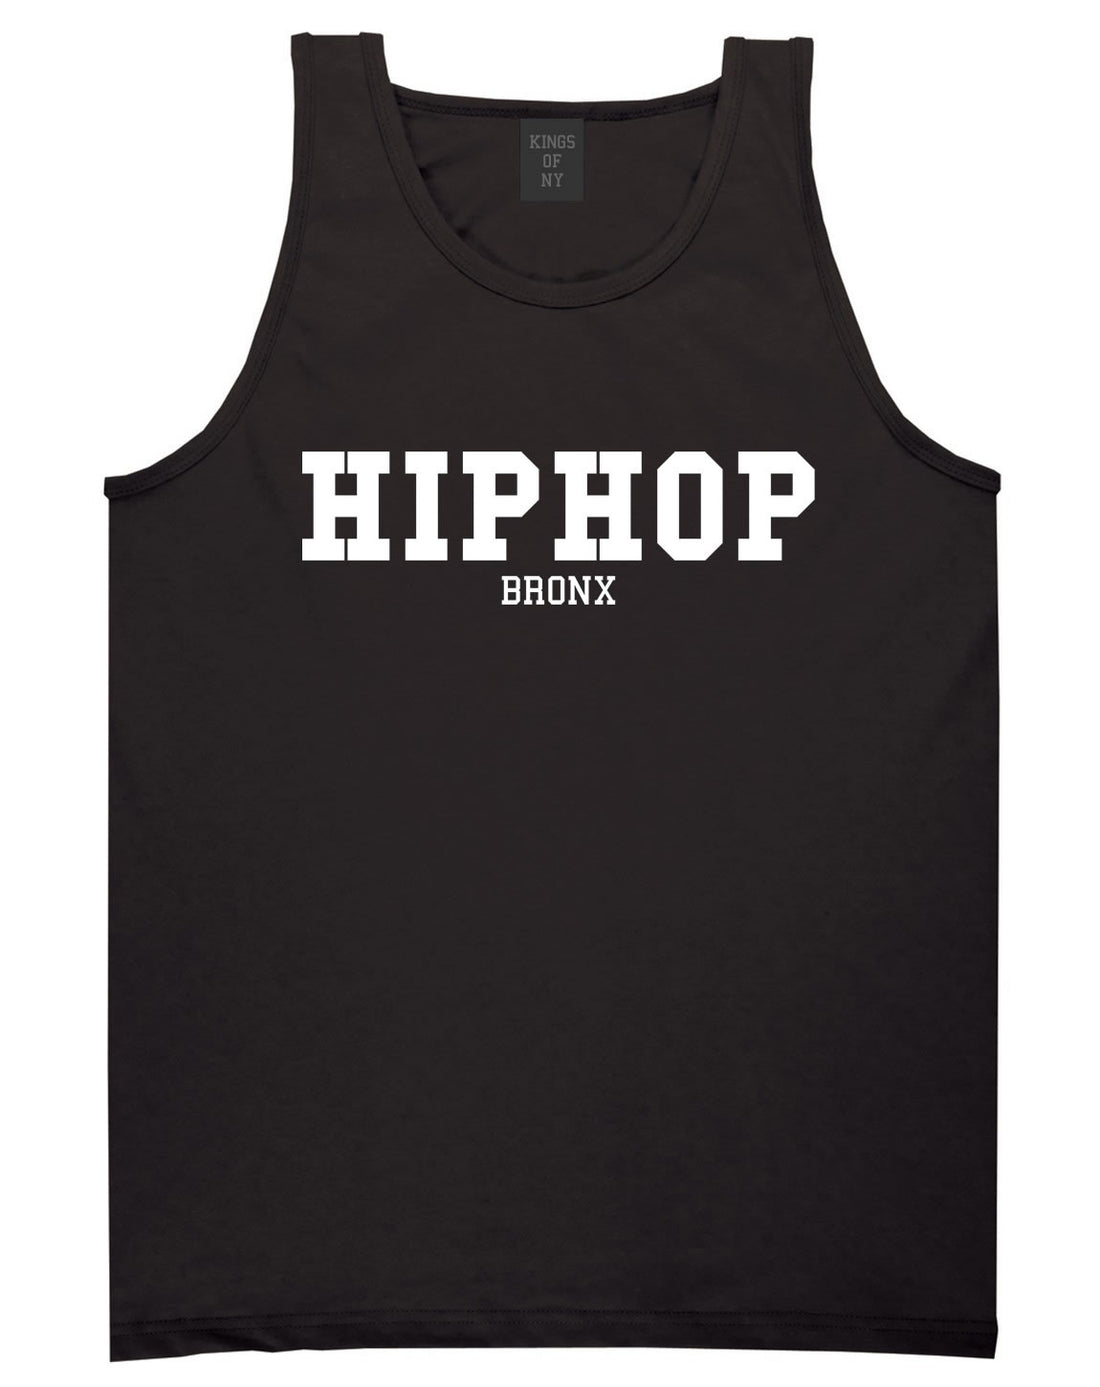 Hiphop the Bronx Tank Top in Black by Kings Of NY